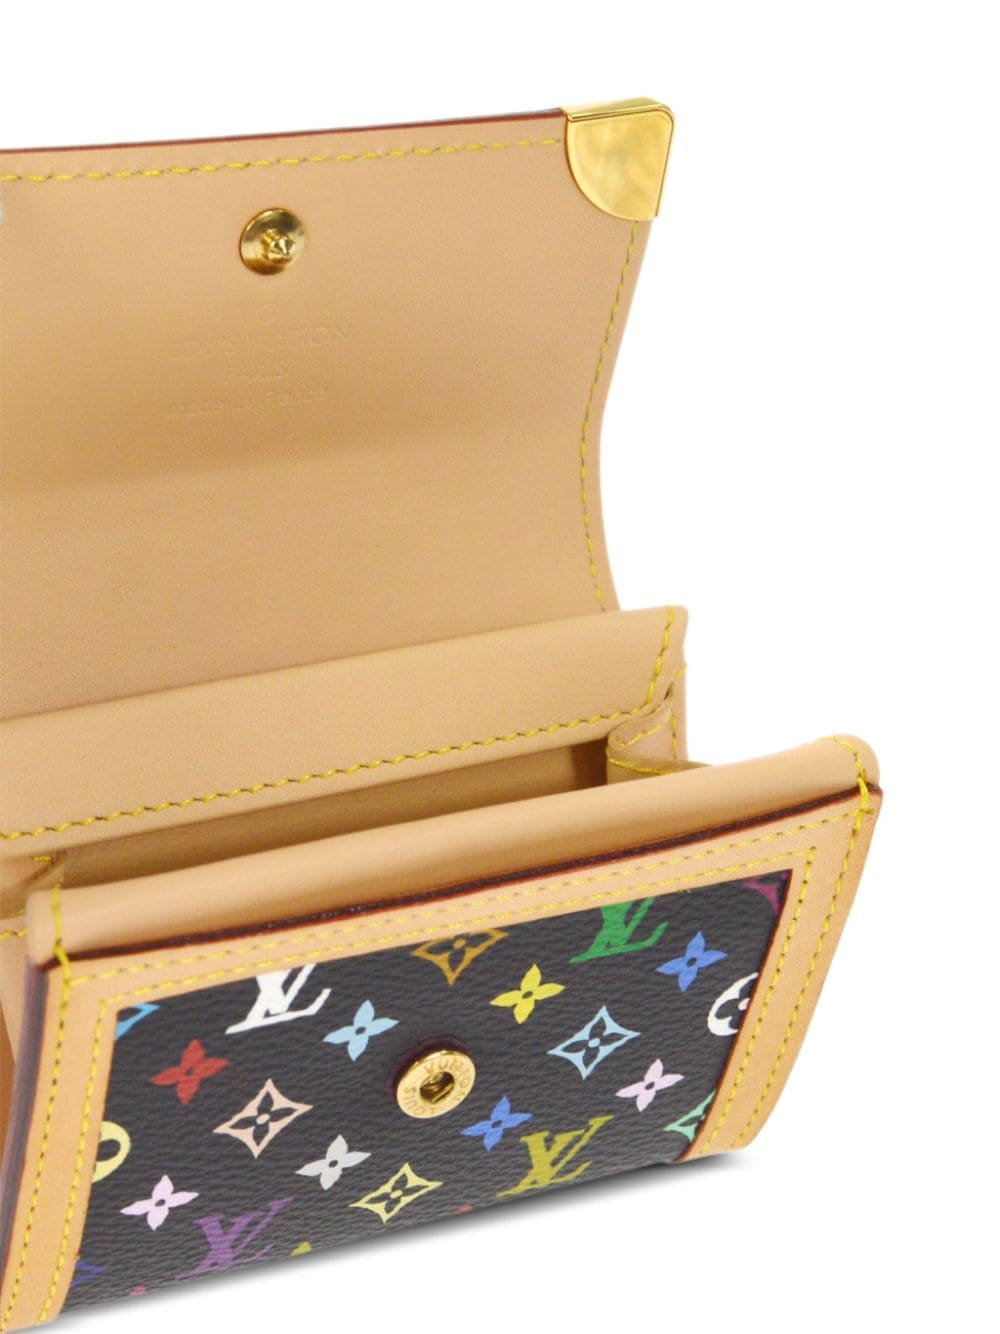 Takashi Murakami and Louis Vuitton Are Discontinuing Their Multicolore  Monogram Collection